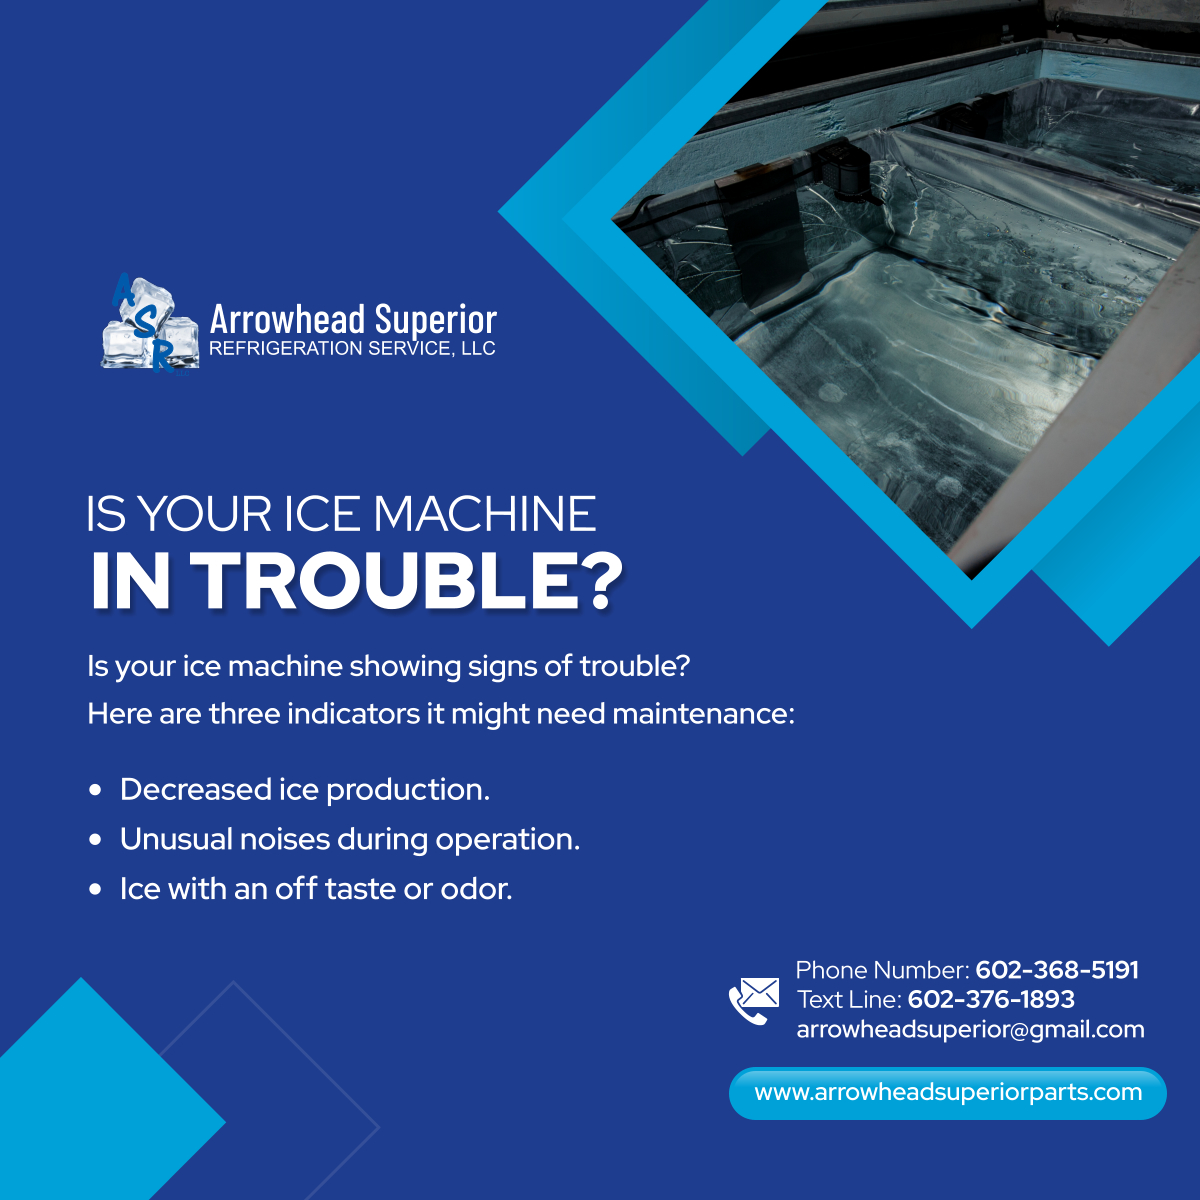 Pay attention to the signs! Timely maintenance keeps your ice flowing smoothly. Contact us today for expert service. 

#PeoriaAZ #CommercialRefrigerationServices #IceMachine #MaintenanceNeeded #KeepItCool #IceMachineRepair #IceMachineMaintenance #RefrigerationSolutions